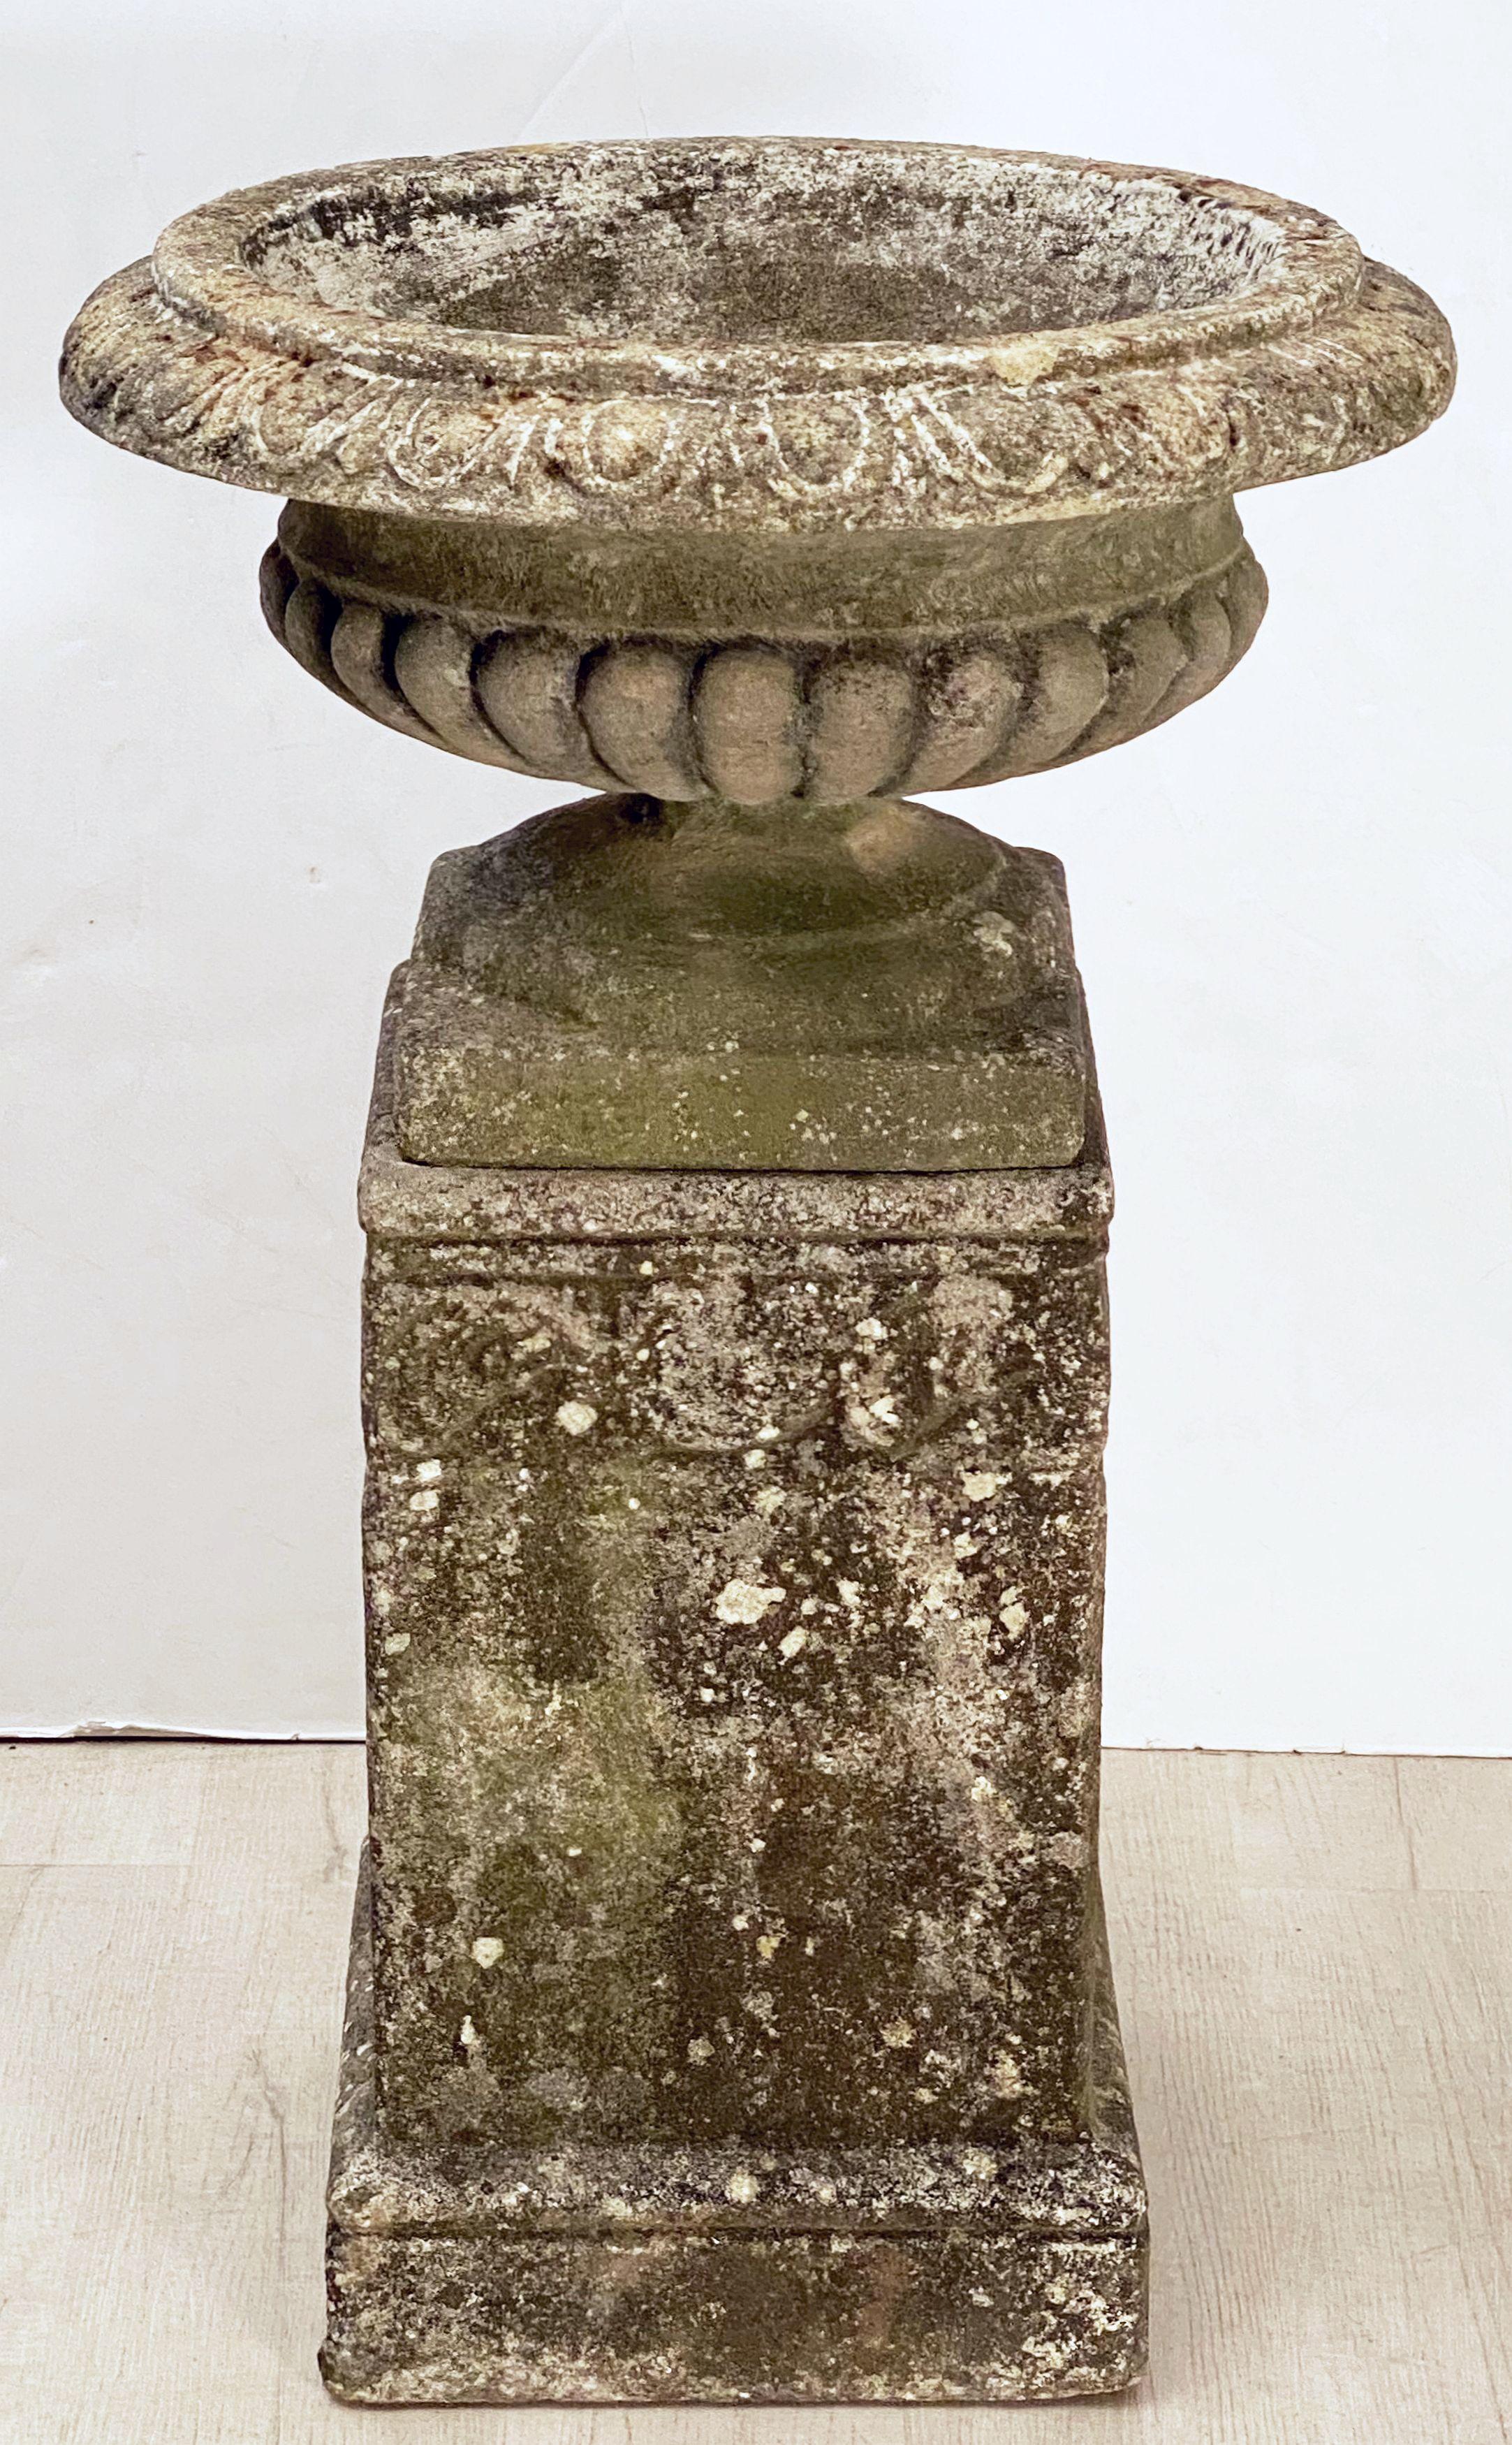 A fine English garden urn (or planter pot) on plinth of composition stone in the Classical style, featuring an urn with semi-lobed body on raised square base, set upon a square plinth with a scrollwork design to the sides.

Perfect for a garden room